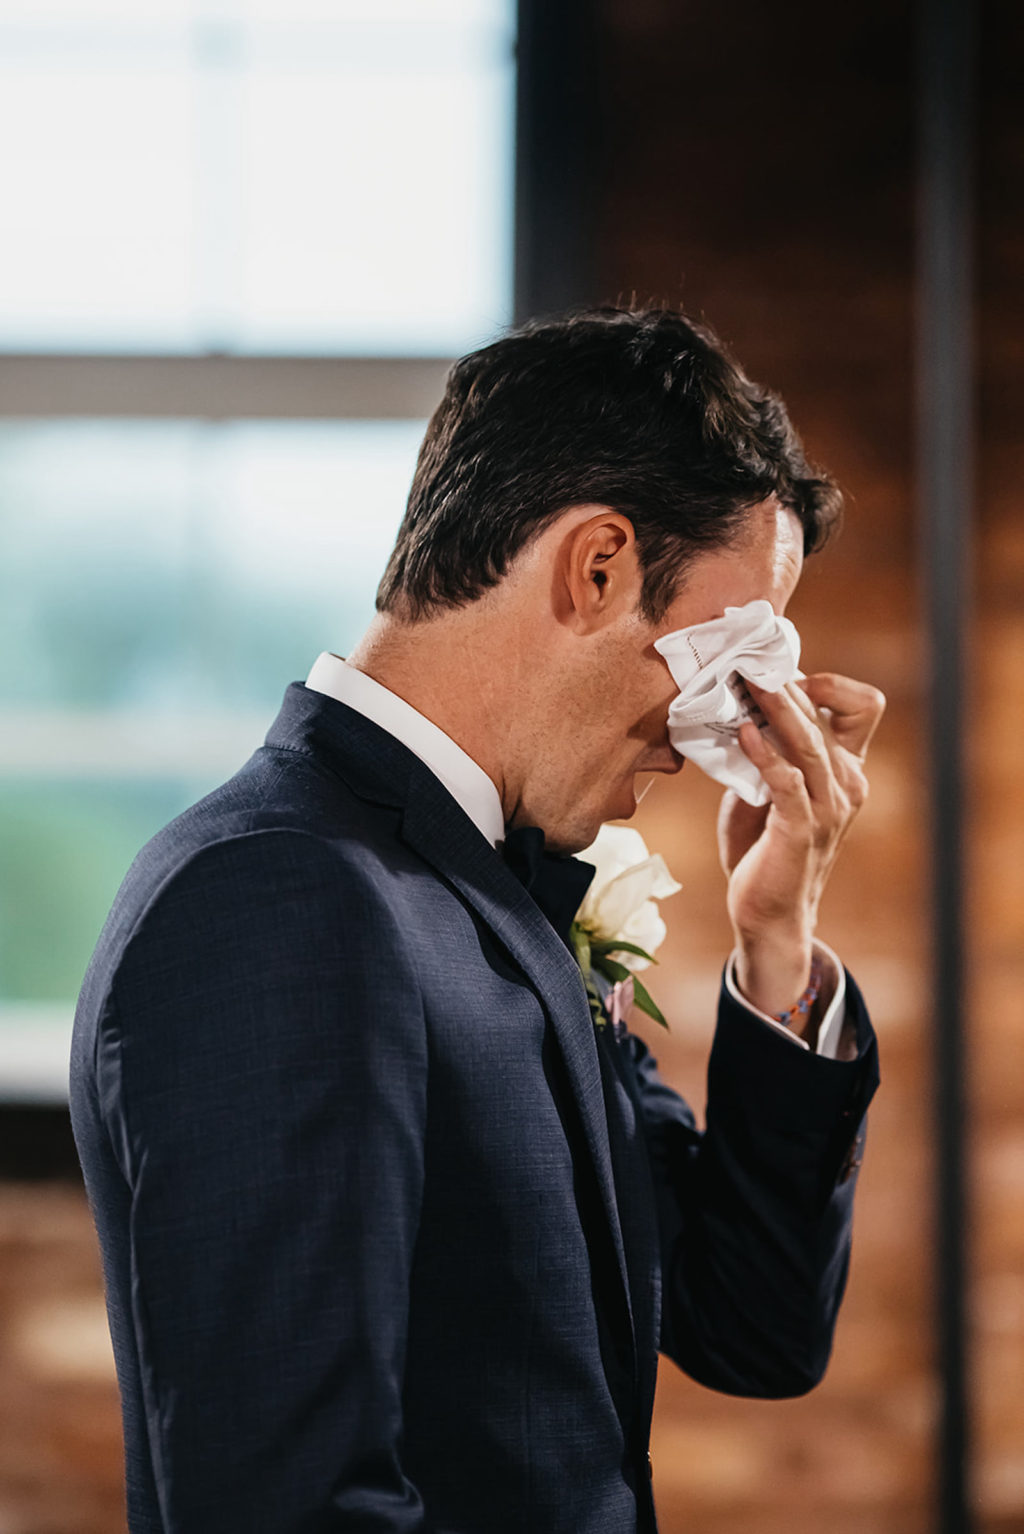 Florida Groom Sees Bride During Wedding Ceremony, Wipes Tears At Alter